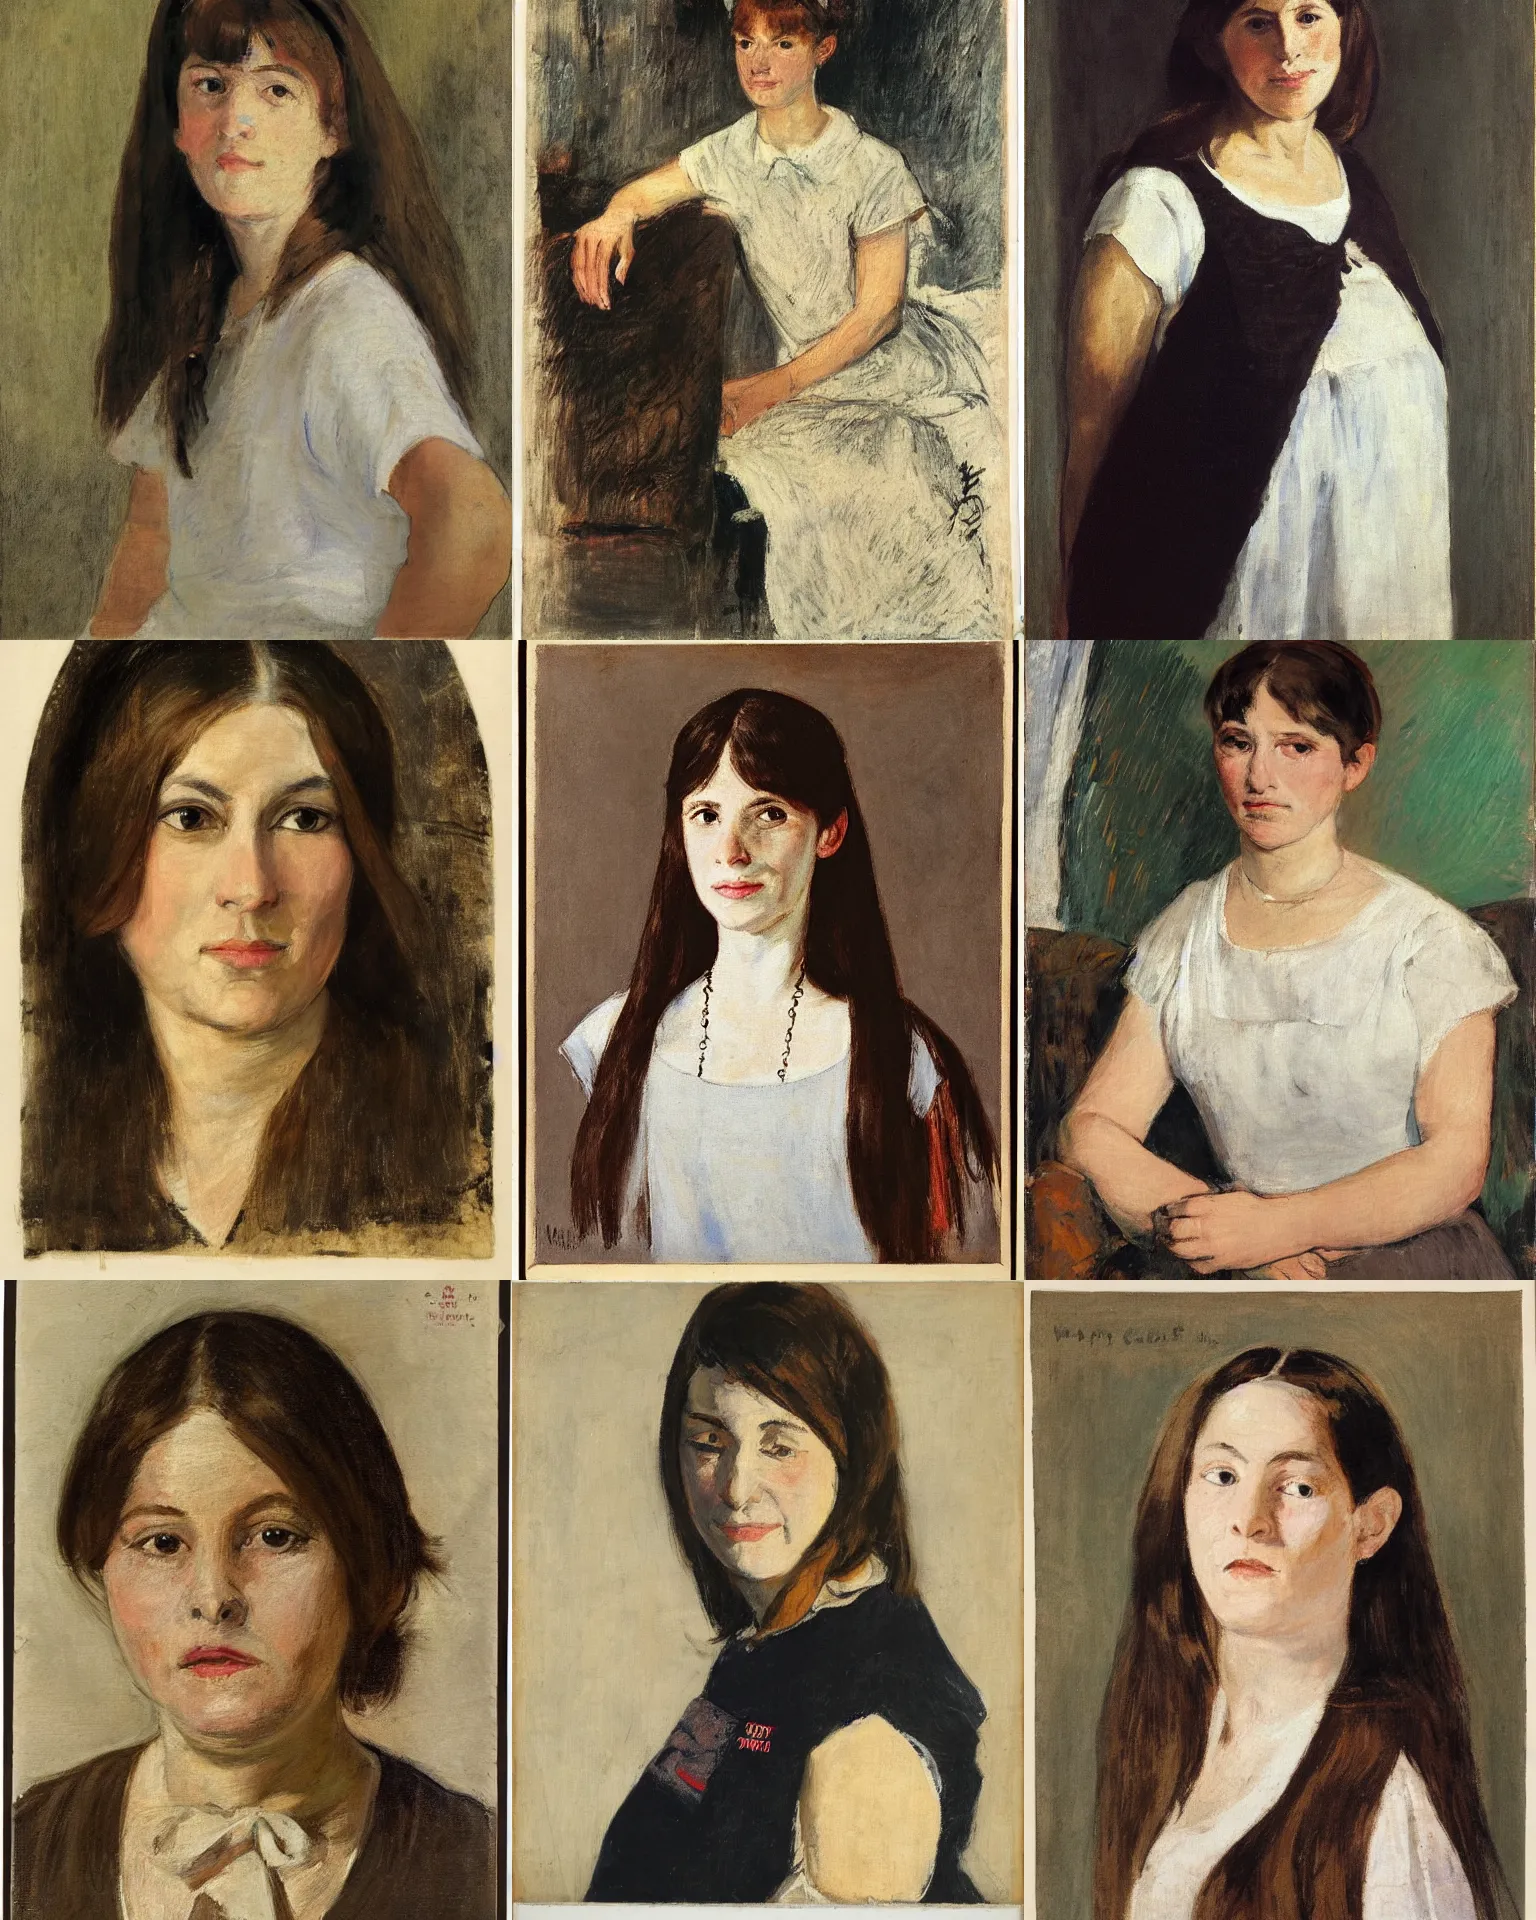 Prompt: a portrait of a woman by mary cassat. she has long straight dark brown hair, parted in the middle. she has large dark brown eyes, a small refined nose, and thin lips. she is wearing a t - shirt with the supreme brand across it, a sleeveless white blouse, a pair of dark brown capris, and black loafers.